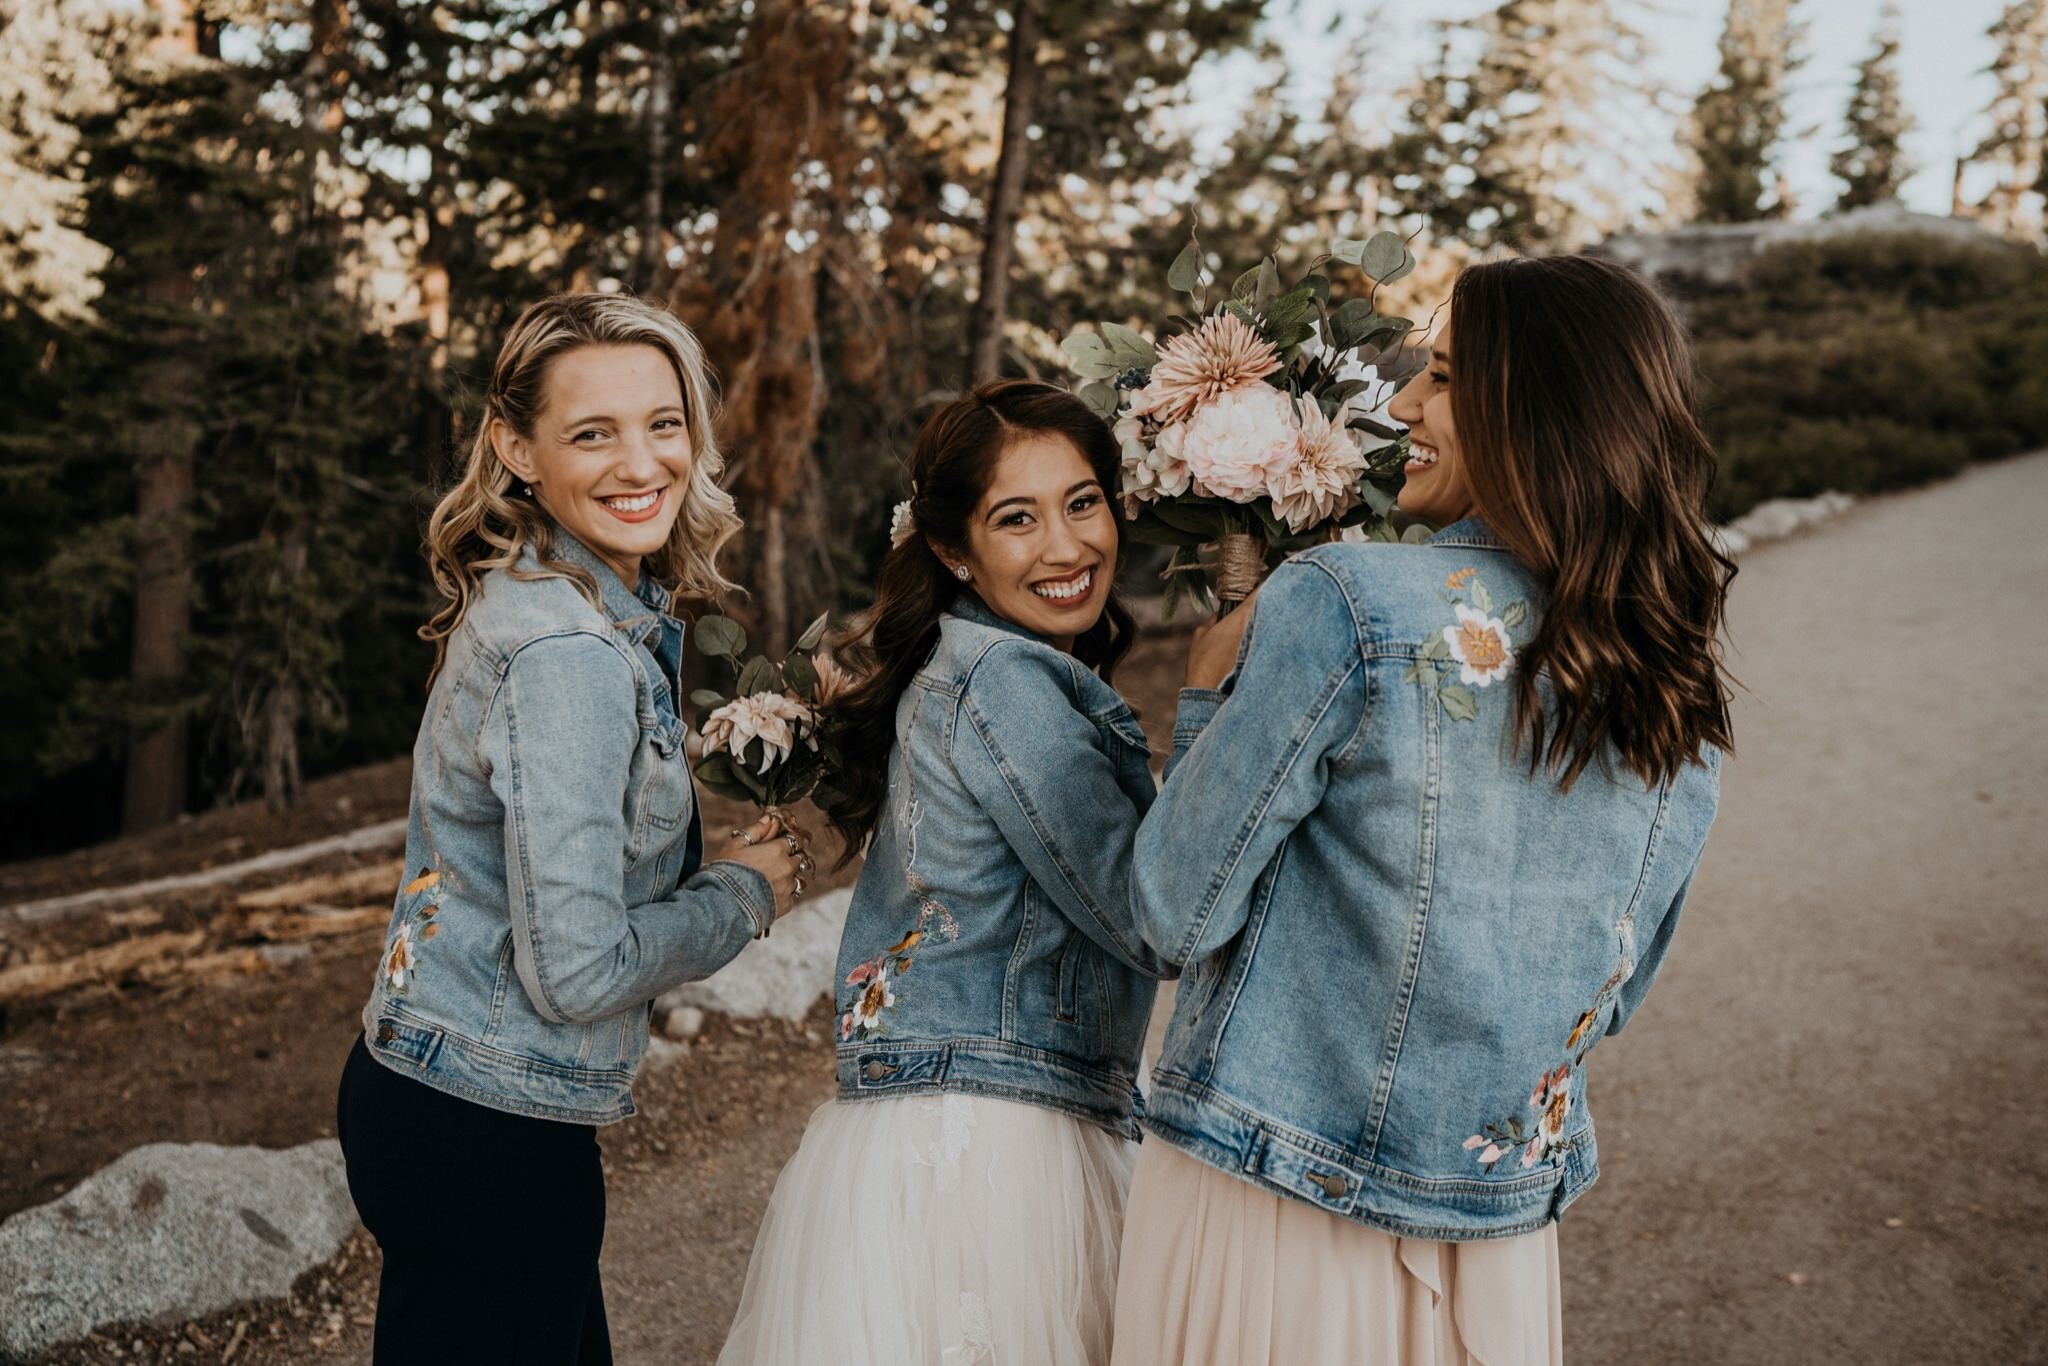 Matching denim jackets bride and bridesmaid Dearly Threaded | Yosemite National Park elopement and wedding photos at Glacier Point during sunrise with view of Half Dome